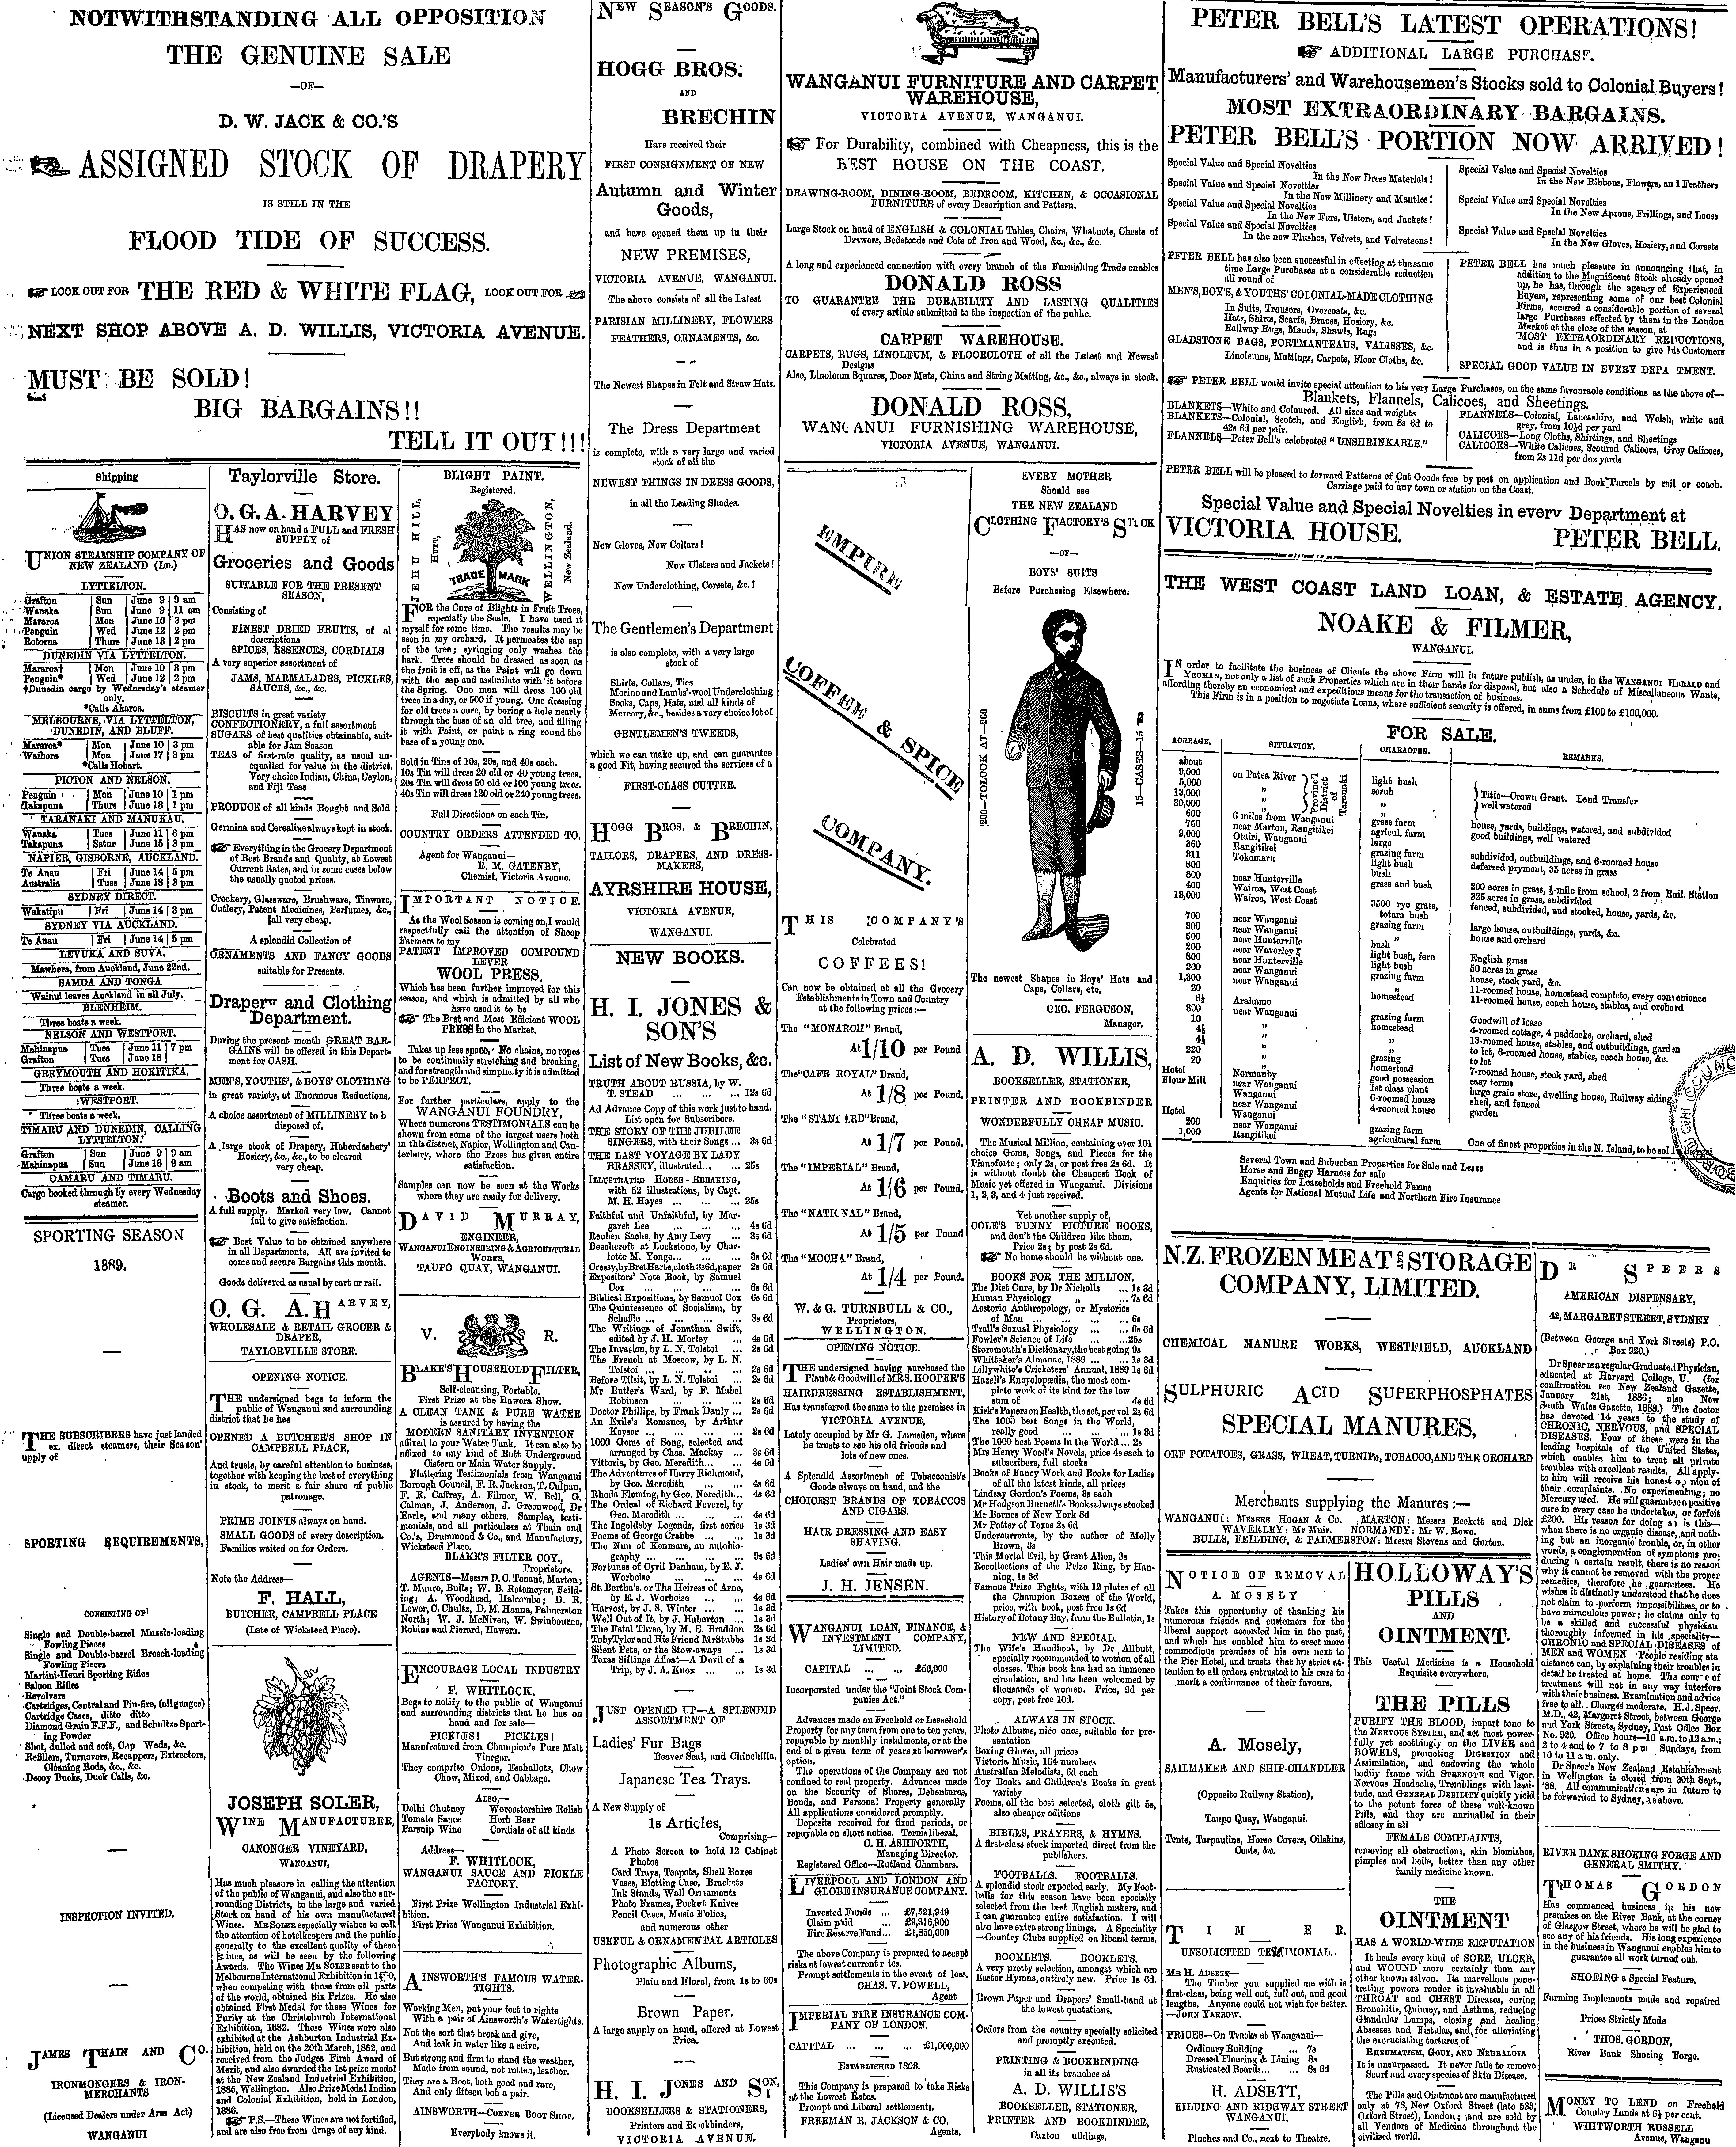 western boot vase of papers past page 1 advertisements column 1 wanganui herald 1889 in notwithsgdandina all oppositioxv s godg 0d peter bells latest operations the genuine sale w additionalsgb purchasf of huuix ukub